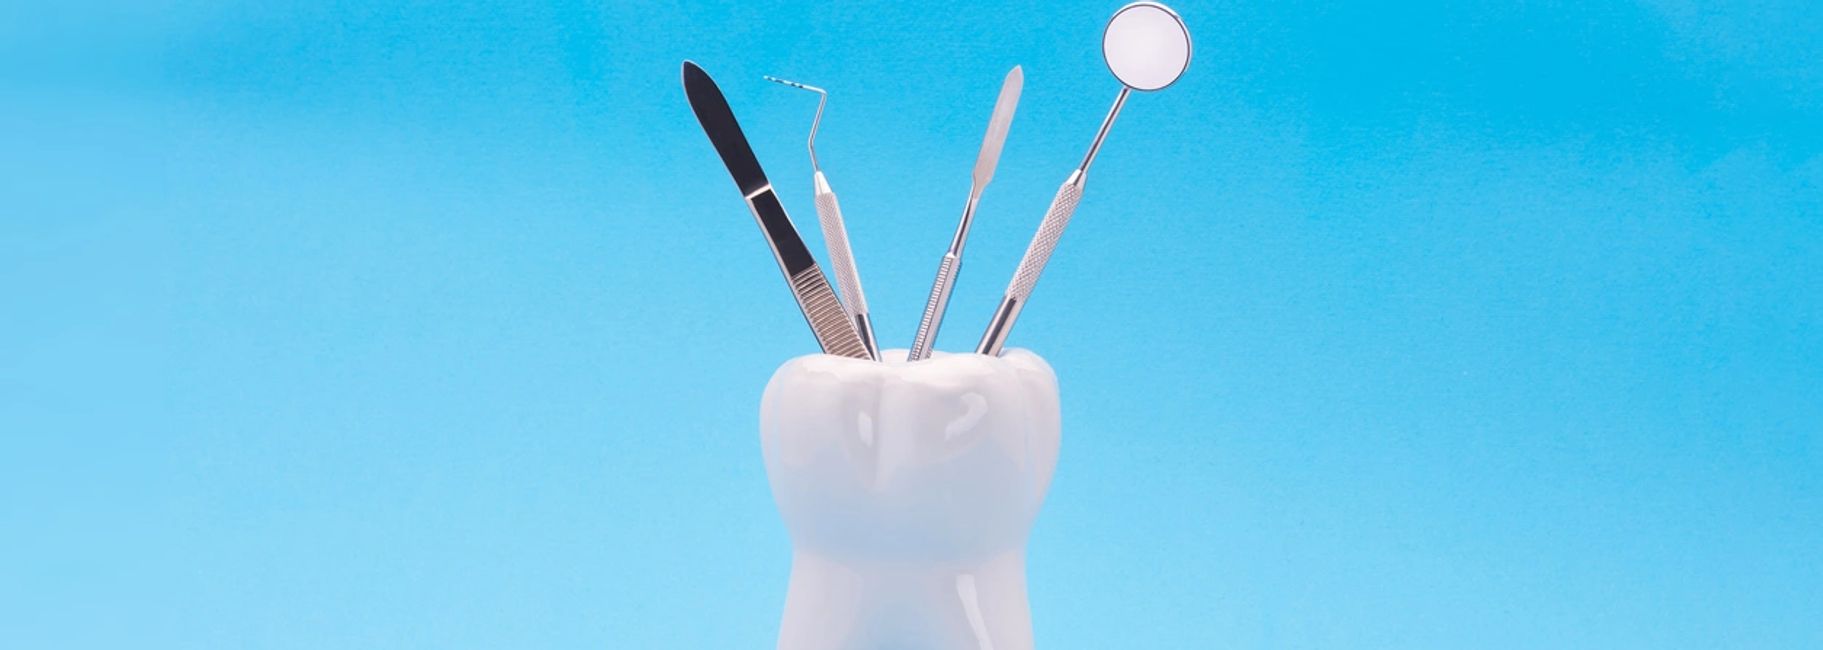 Orthodontic tools in a tooth holder.